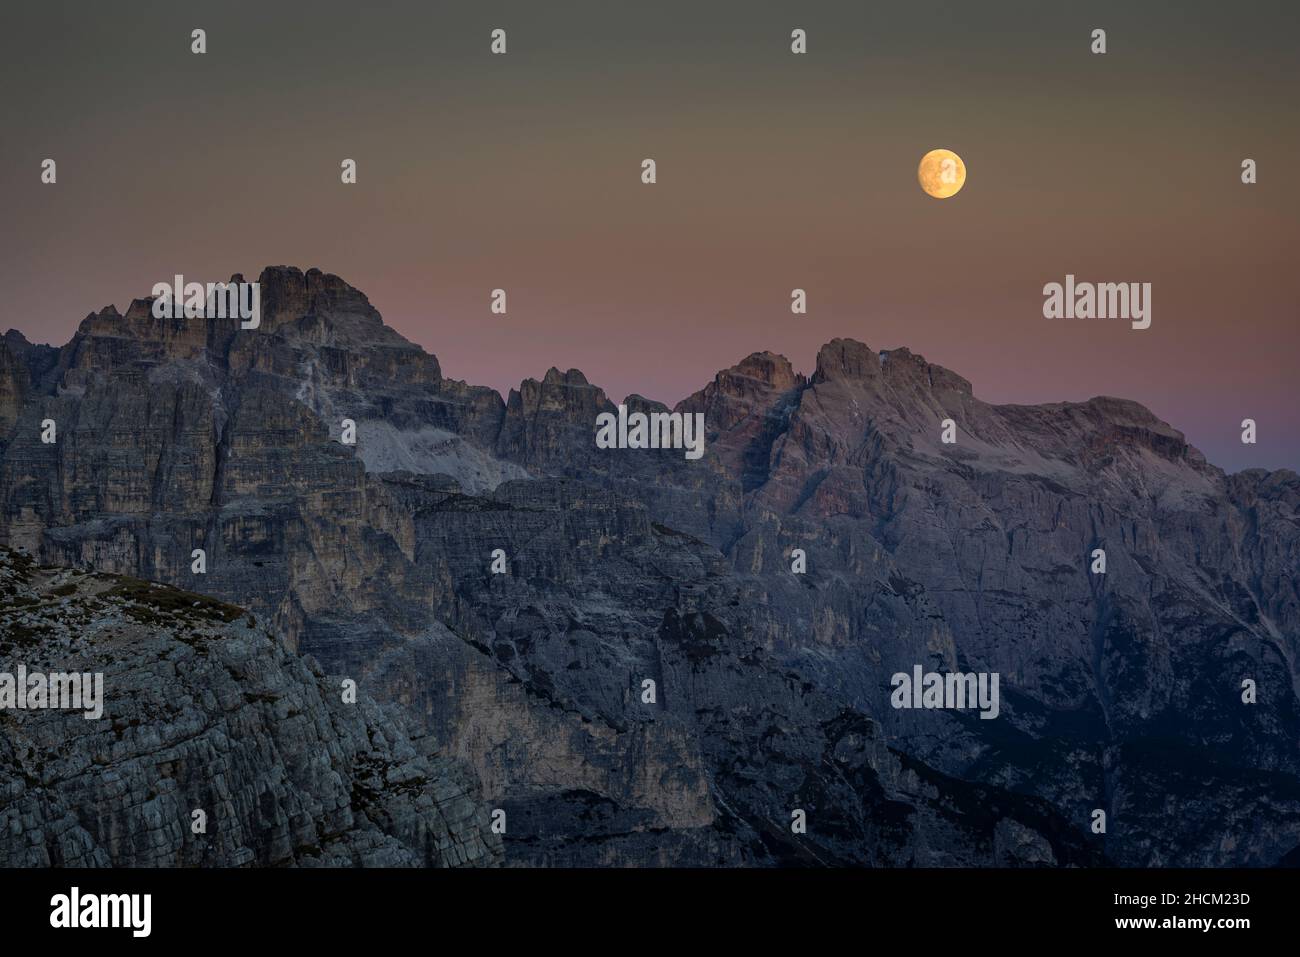 Moonrise at dusk over the Croda da Campo and Monte Camperdelle  mountains of the Sexten Dolomites, Belluno, Italy Stock Photo